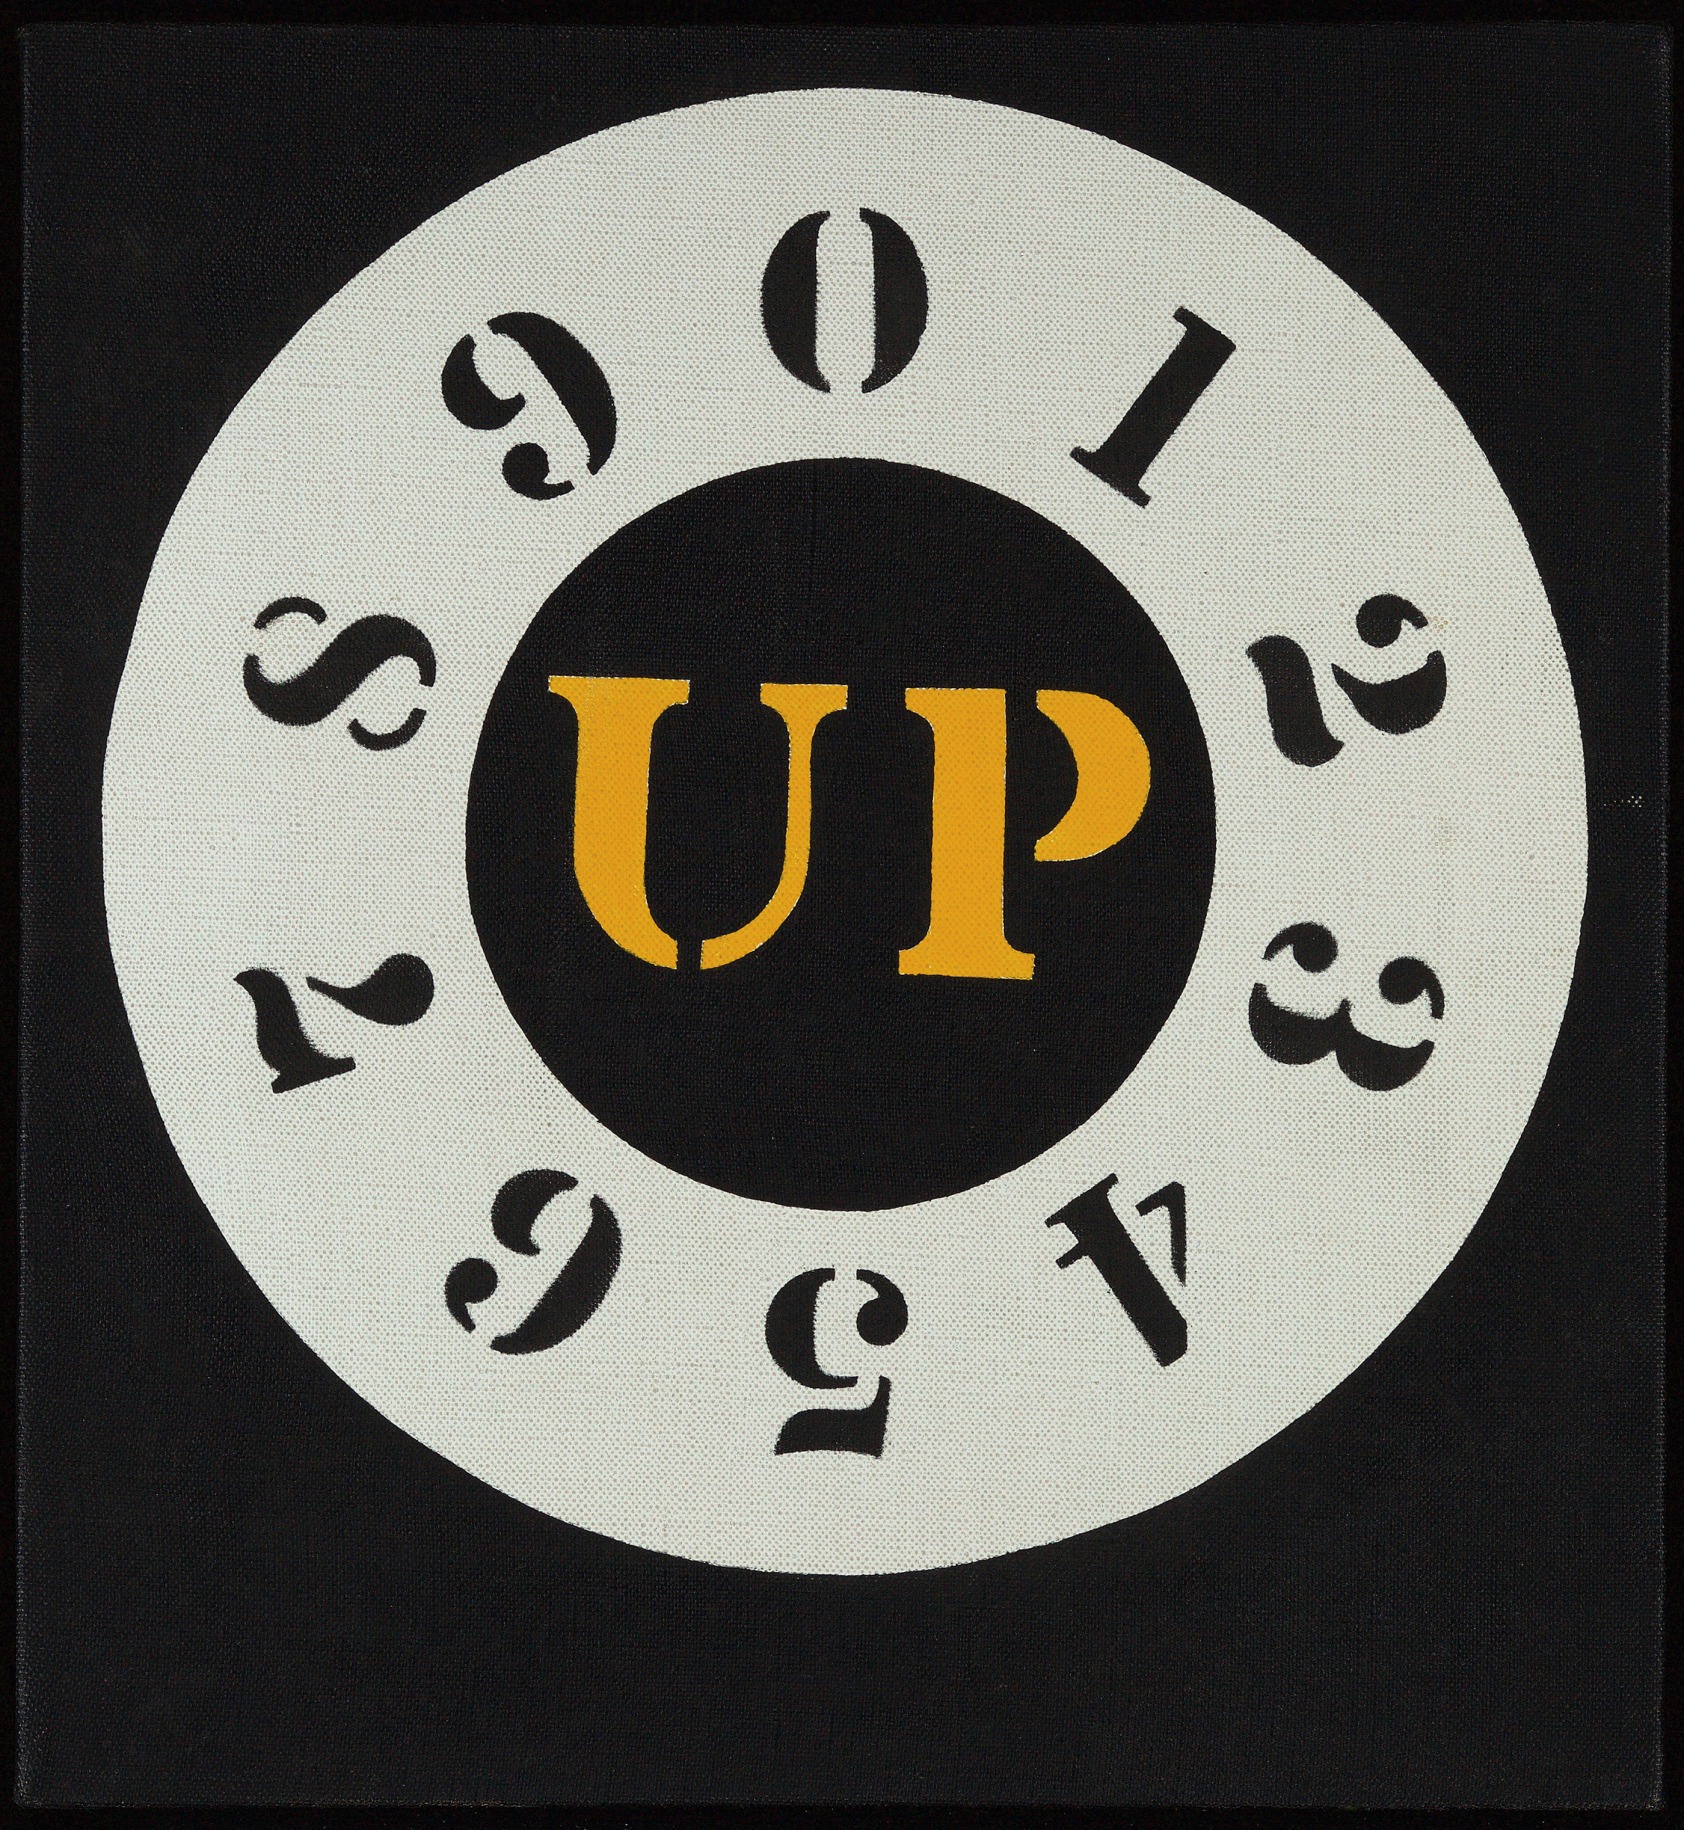 Up, a 12 by 11 inch canvas with a circle on a black background. In the middle of the circle is the word UP, painted in yellow stenciled letters. The star is surrounded by a white ring containing the black numerals going clockwise from zero at the top though nine.